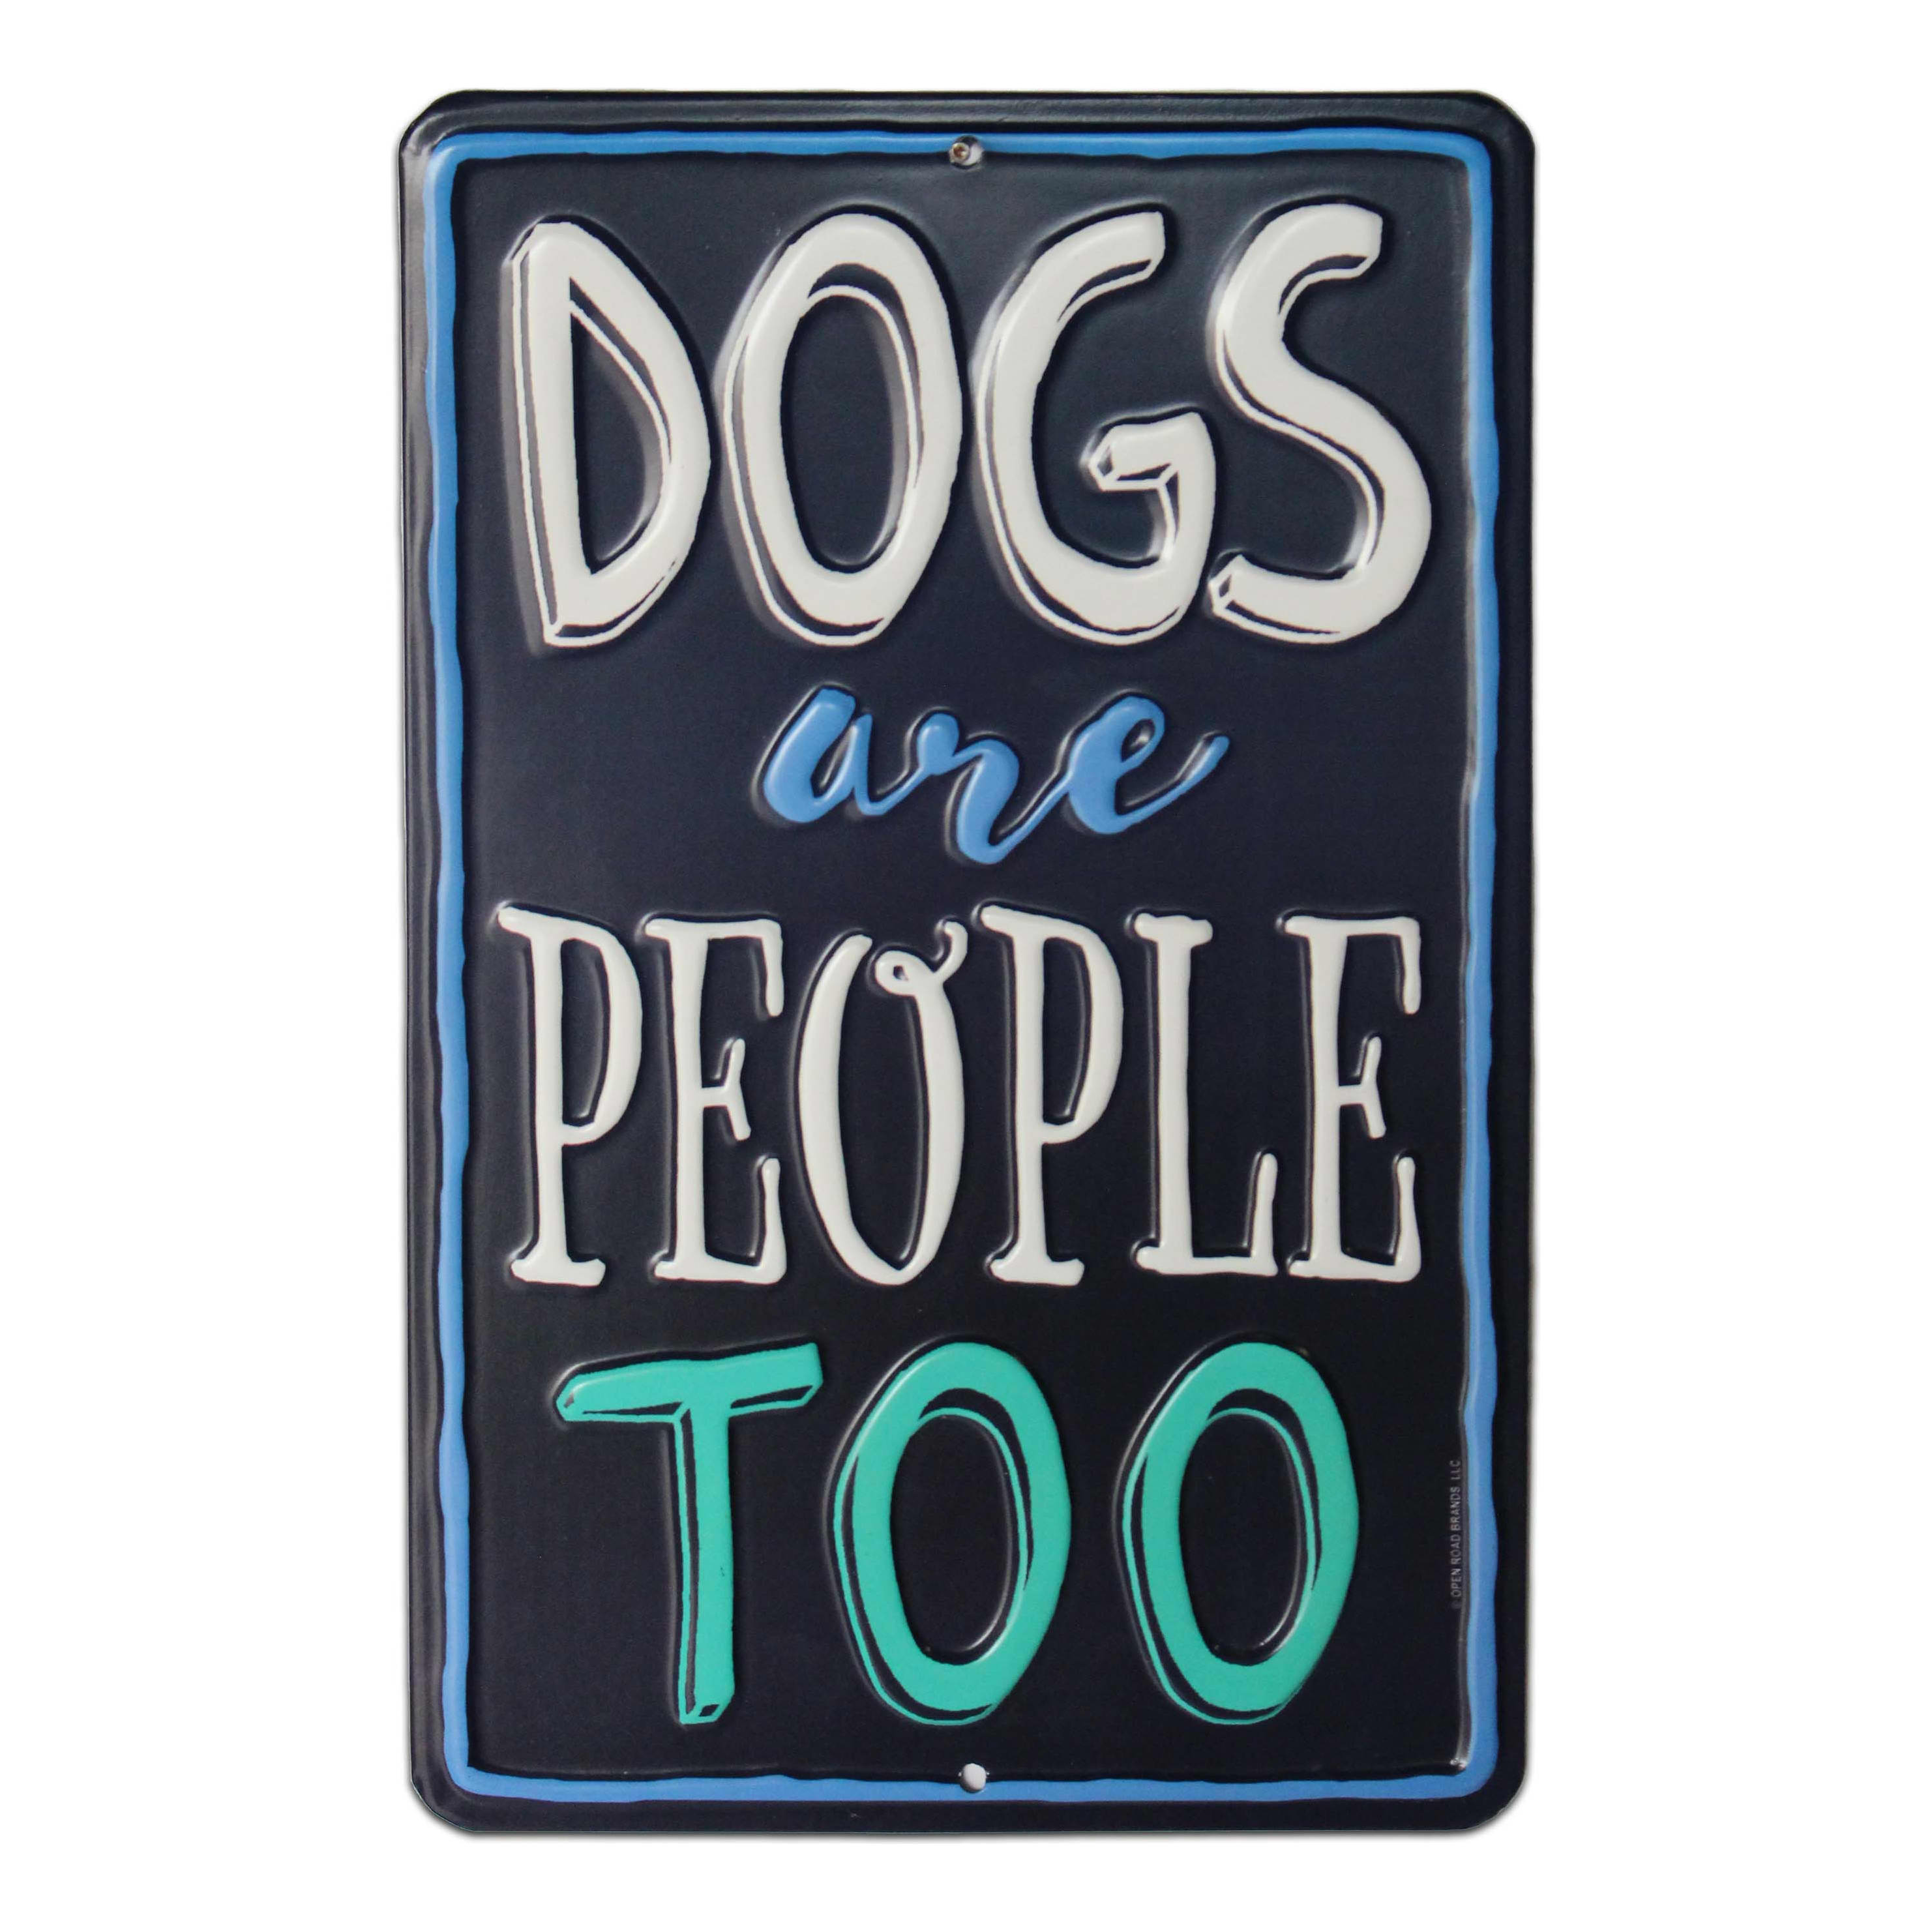 Open Road's Dogs Are People Too Embossed Metal Sign